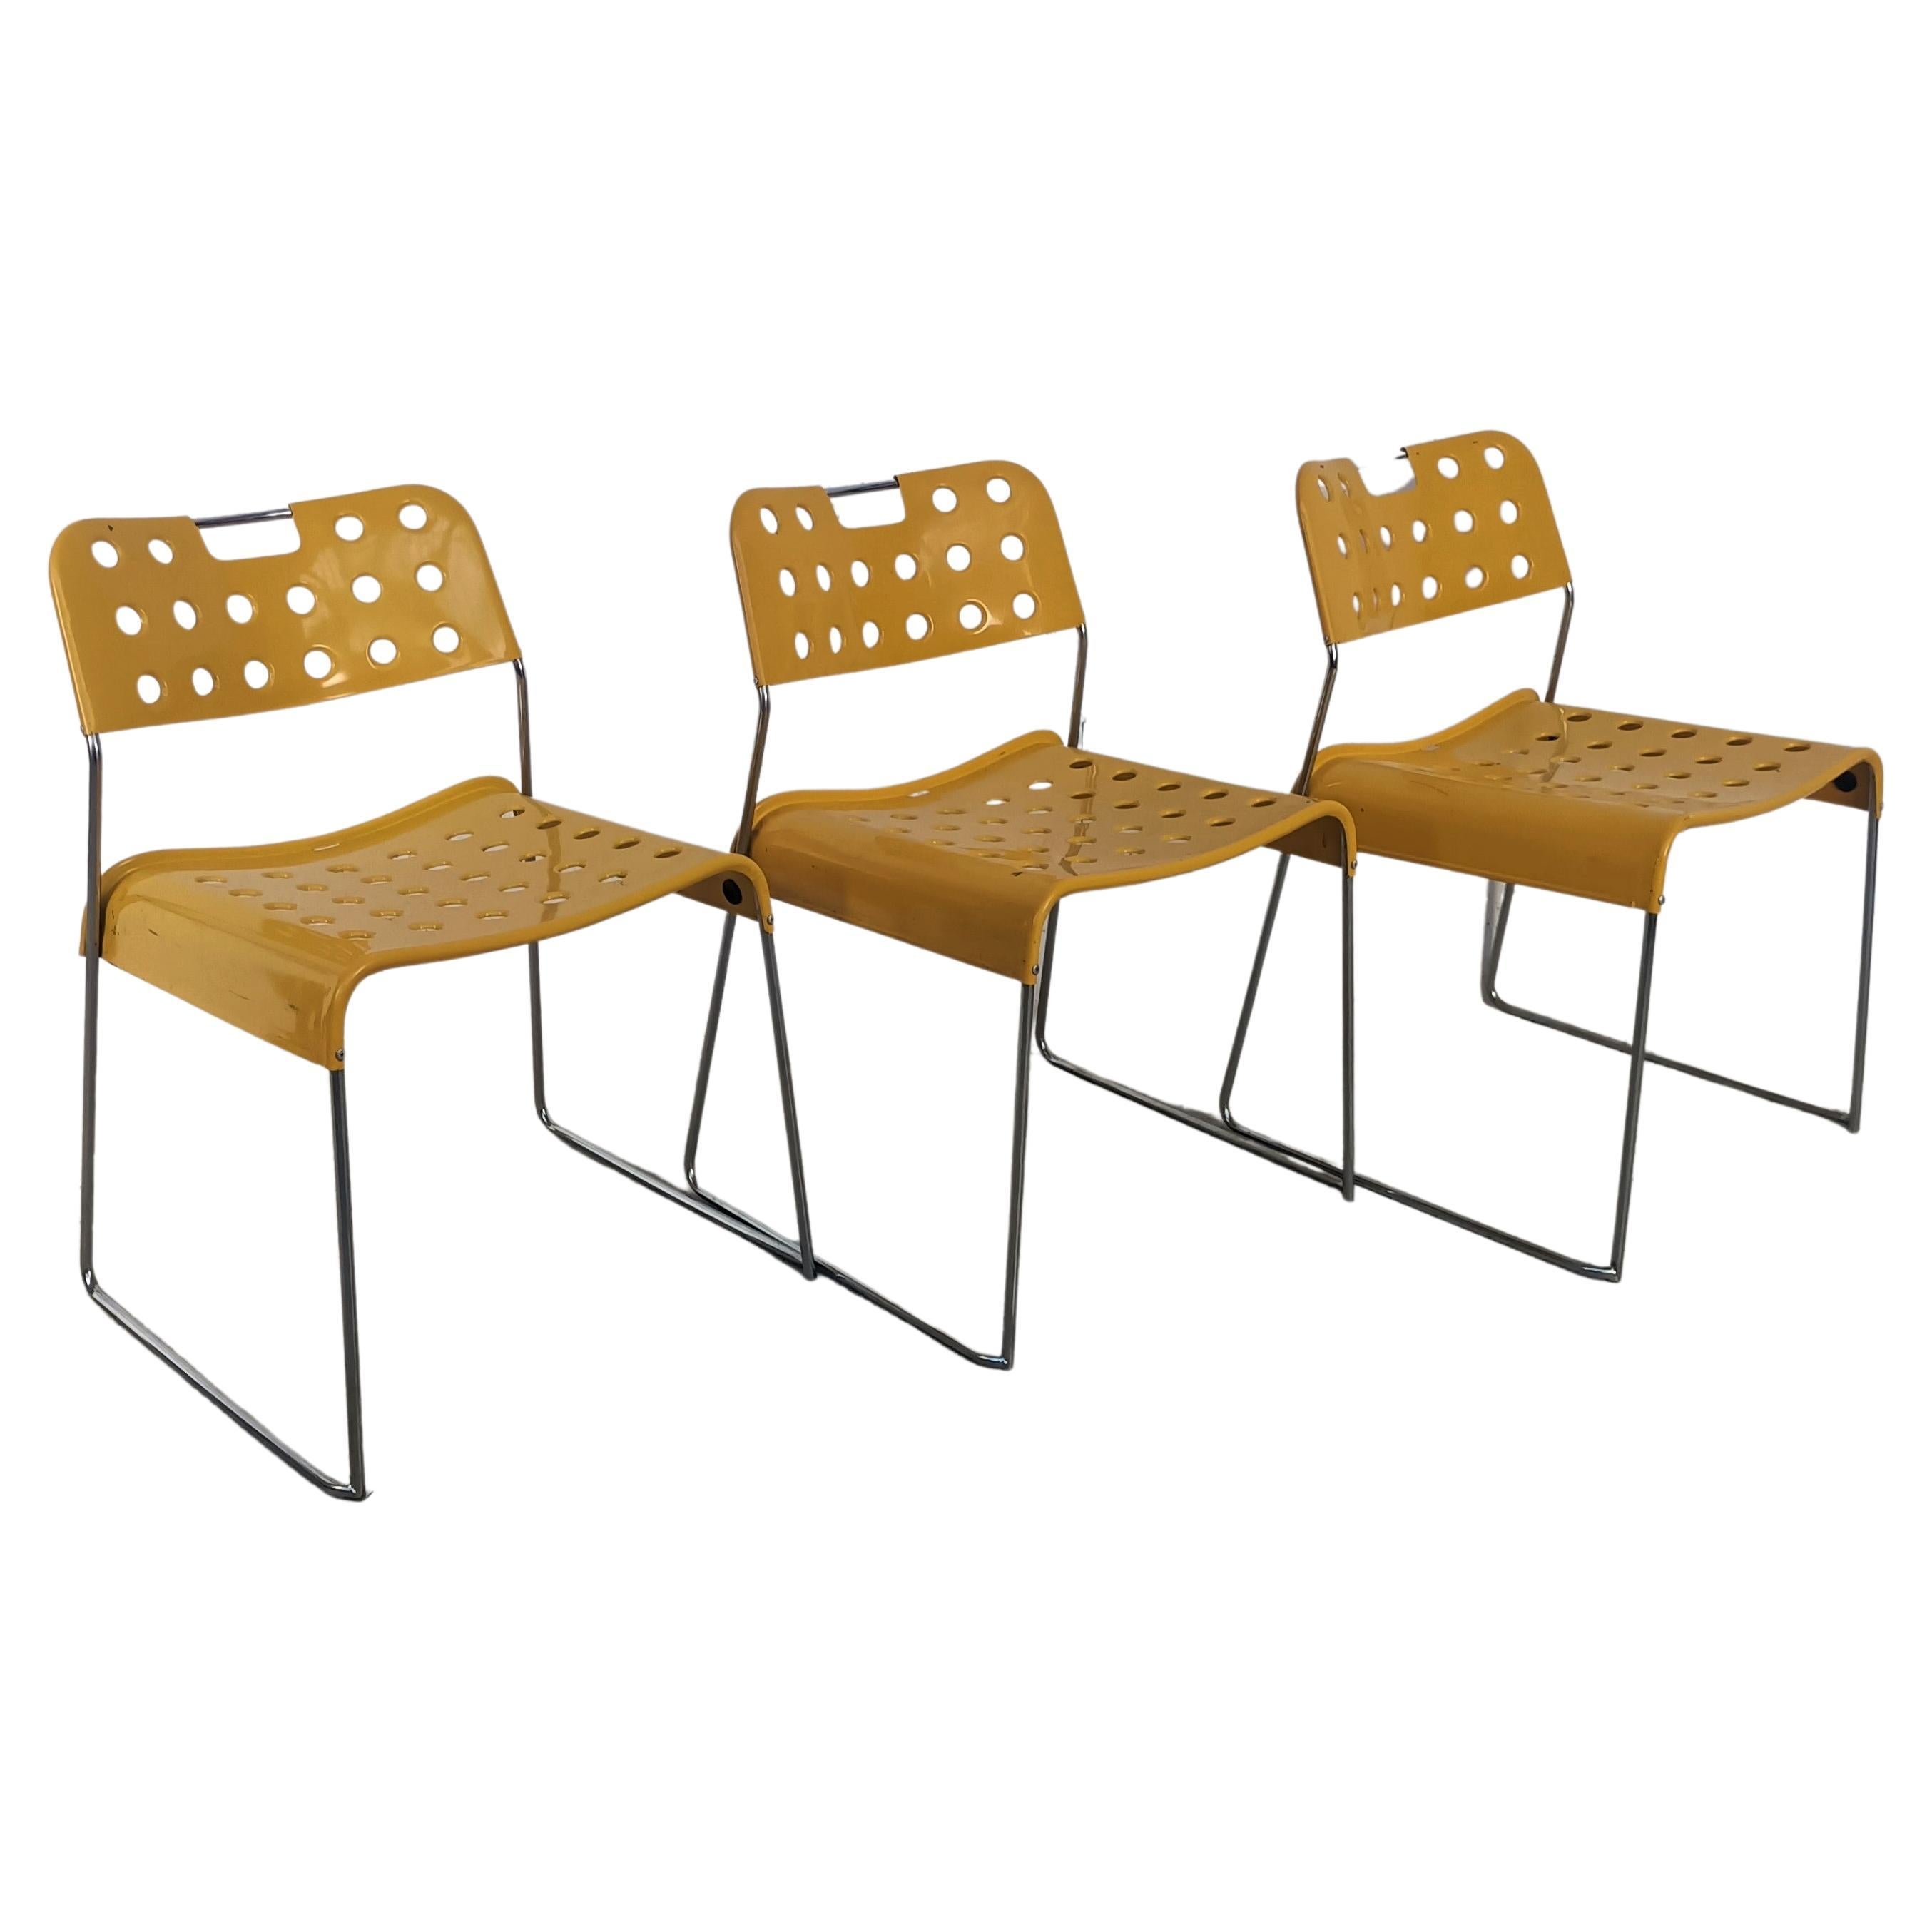 3 Yellow Omkstak Stackable Chairs by Rodney Kinsman for Bieffeplast 70s